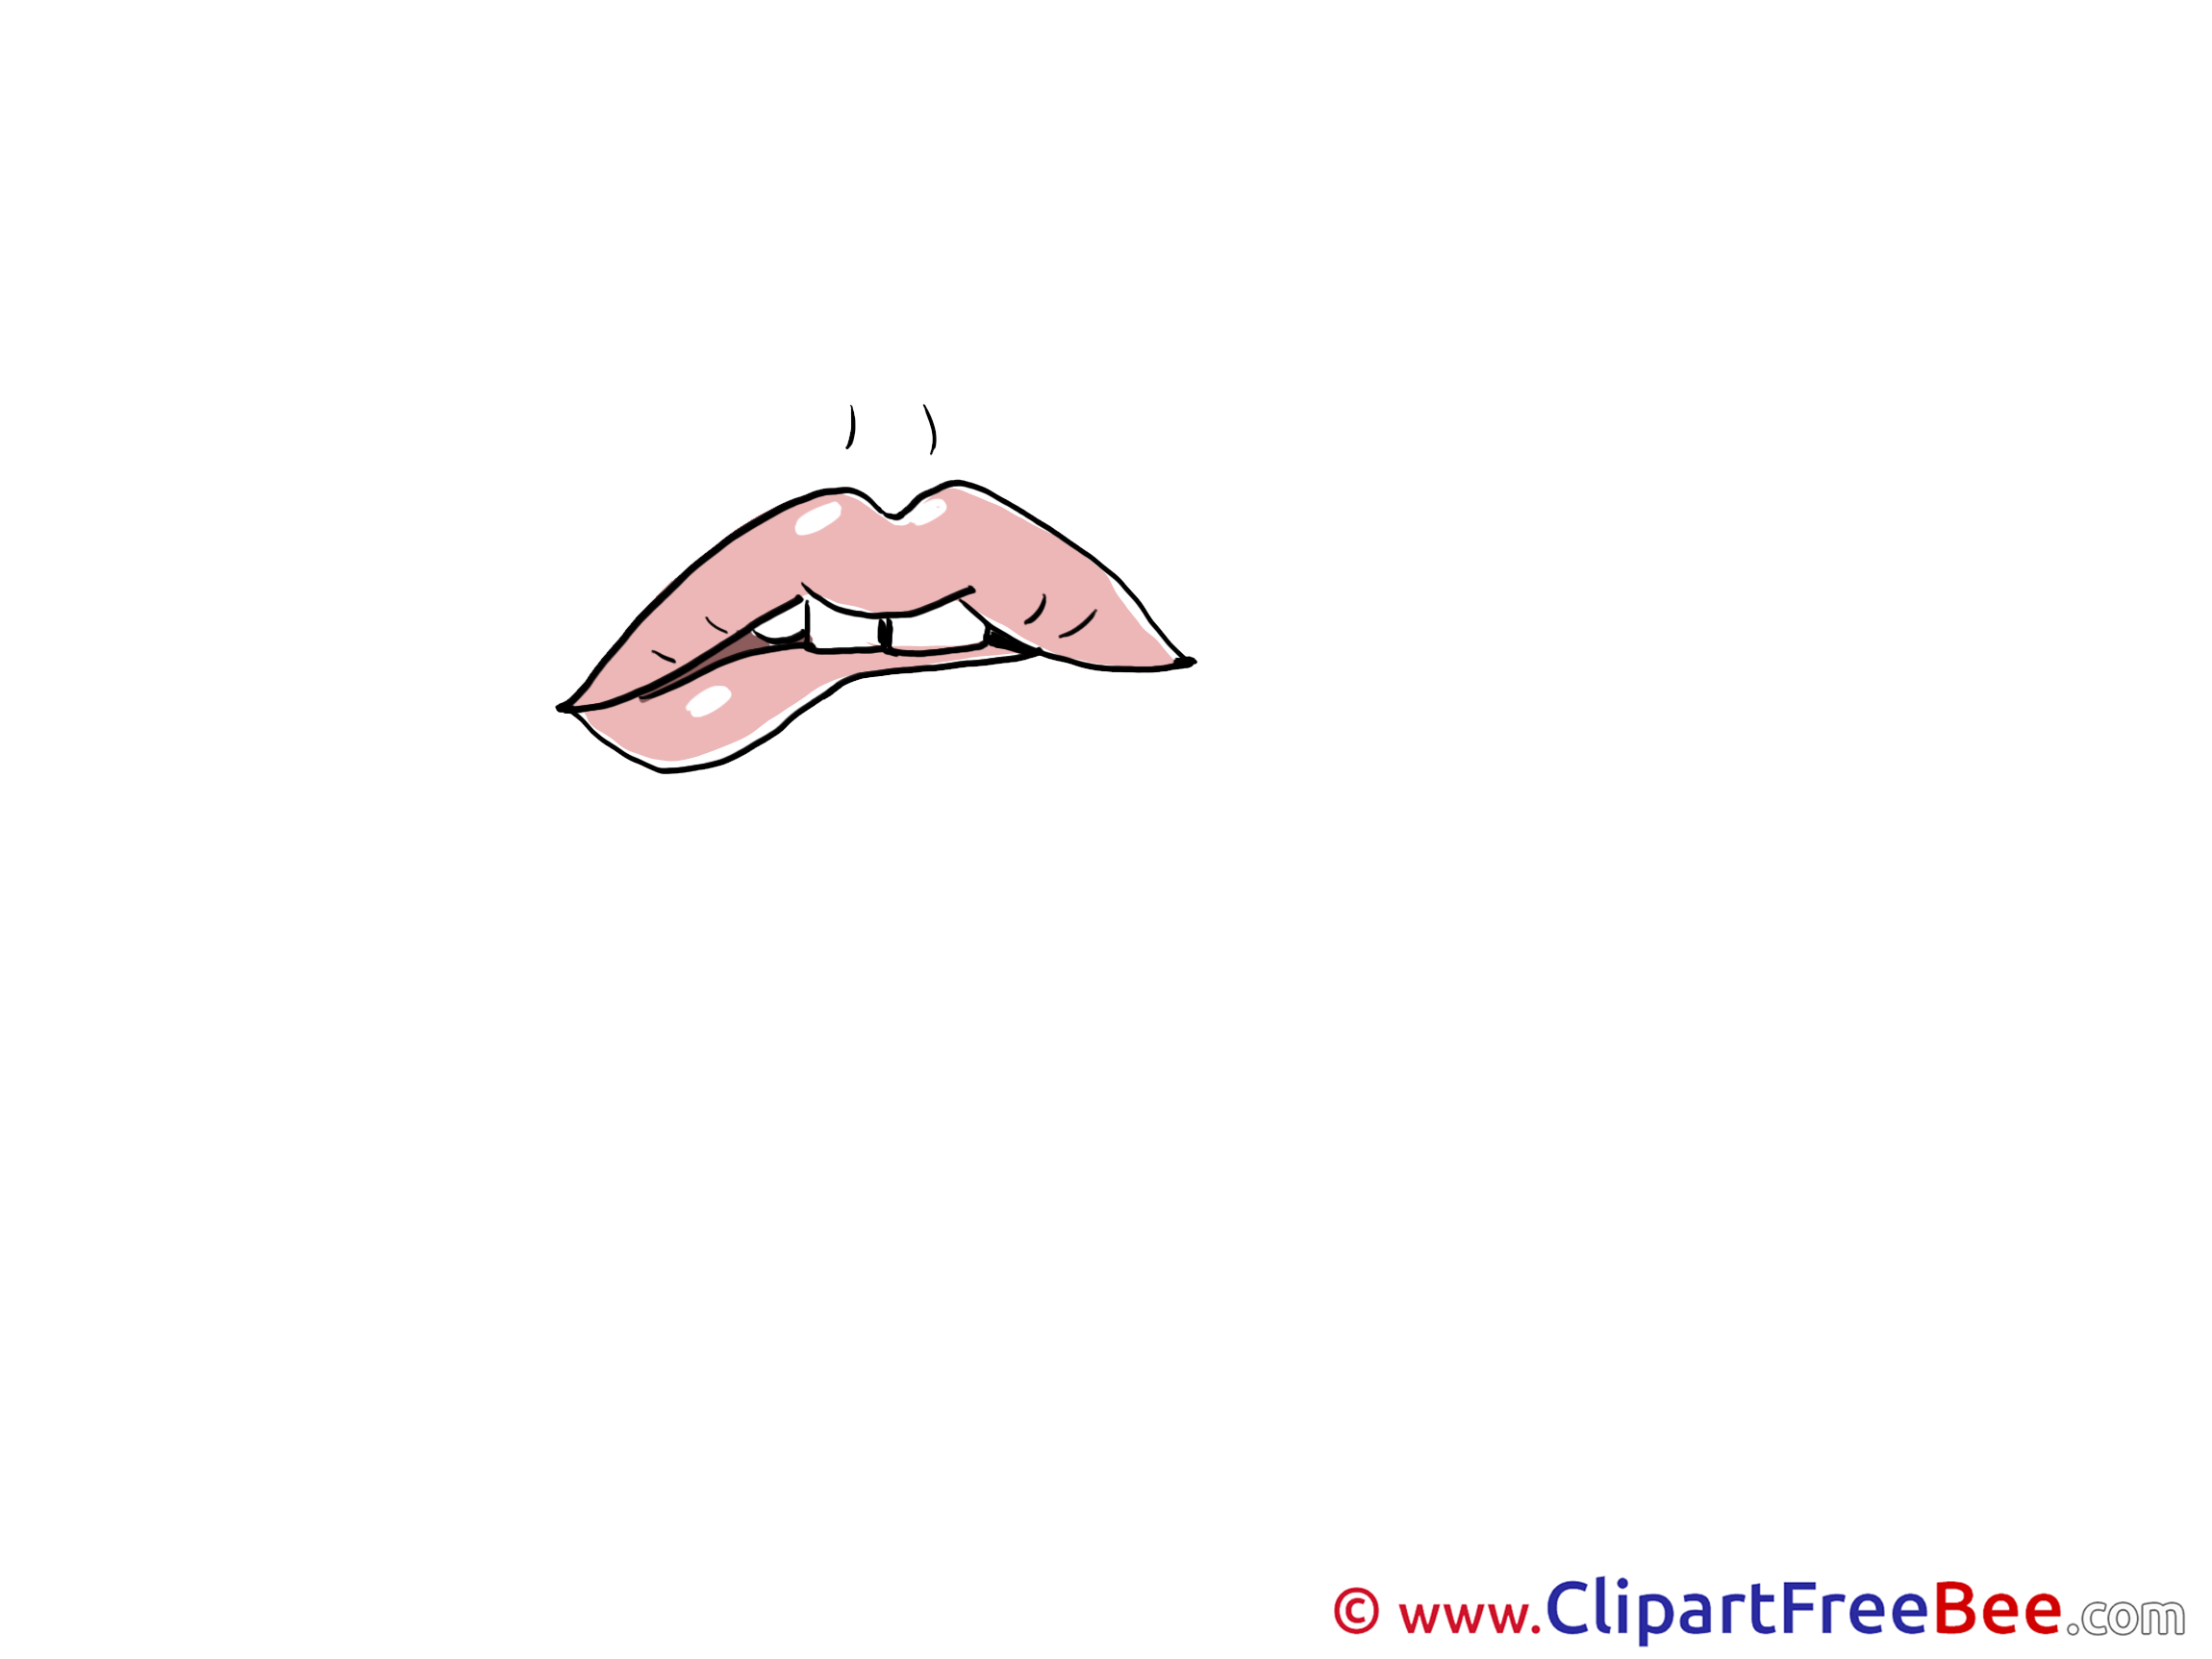 Offended download Clip Art for free